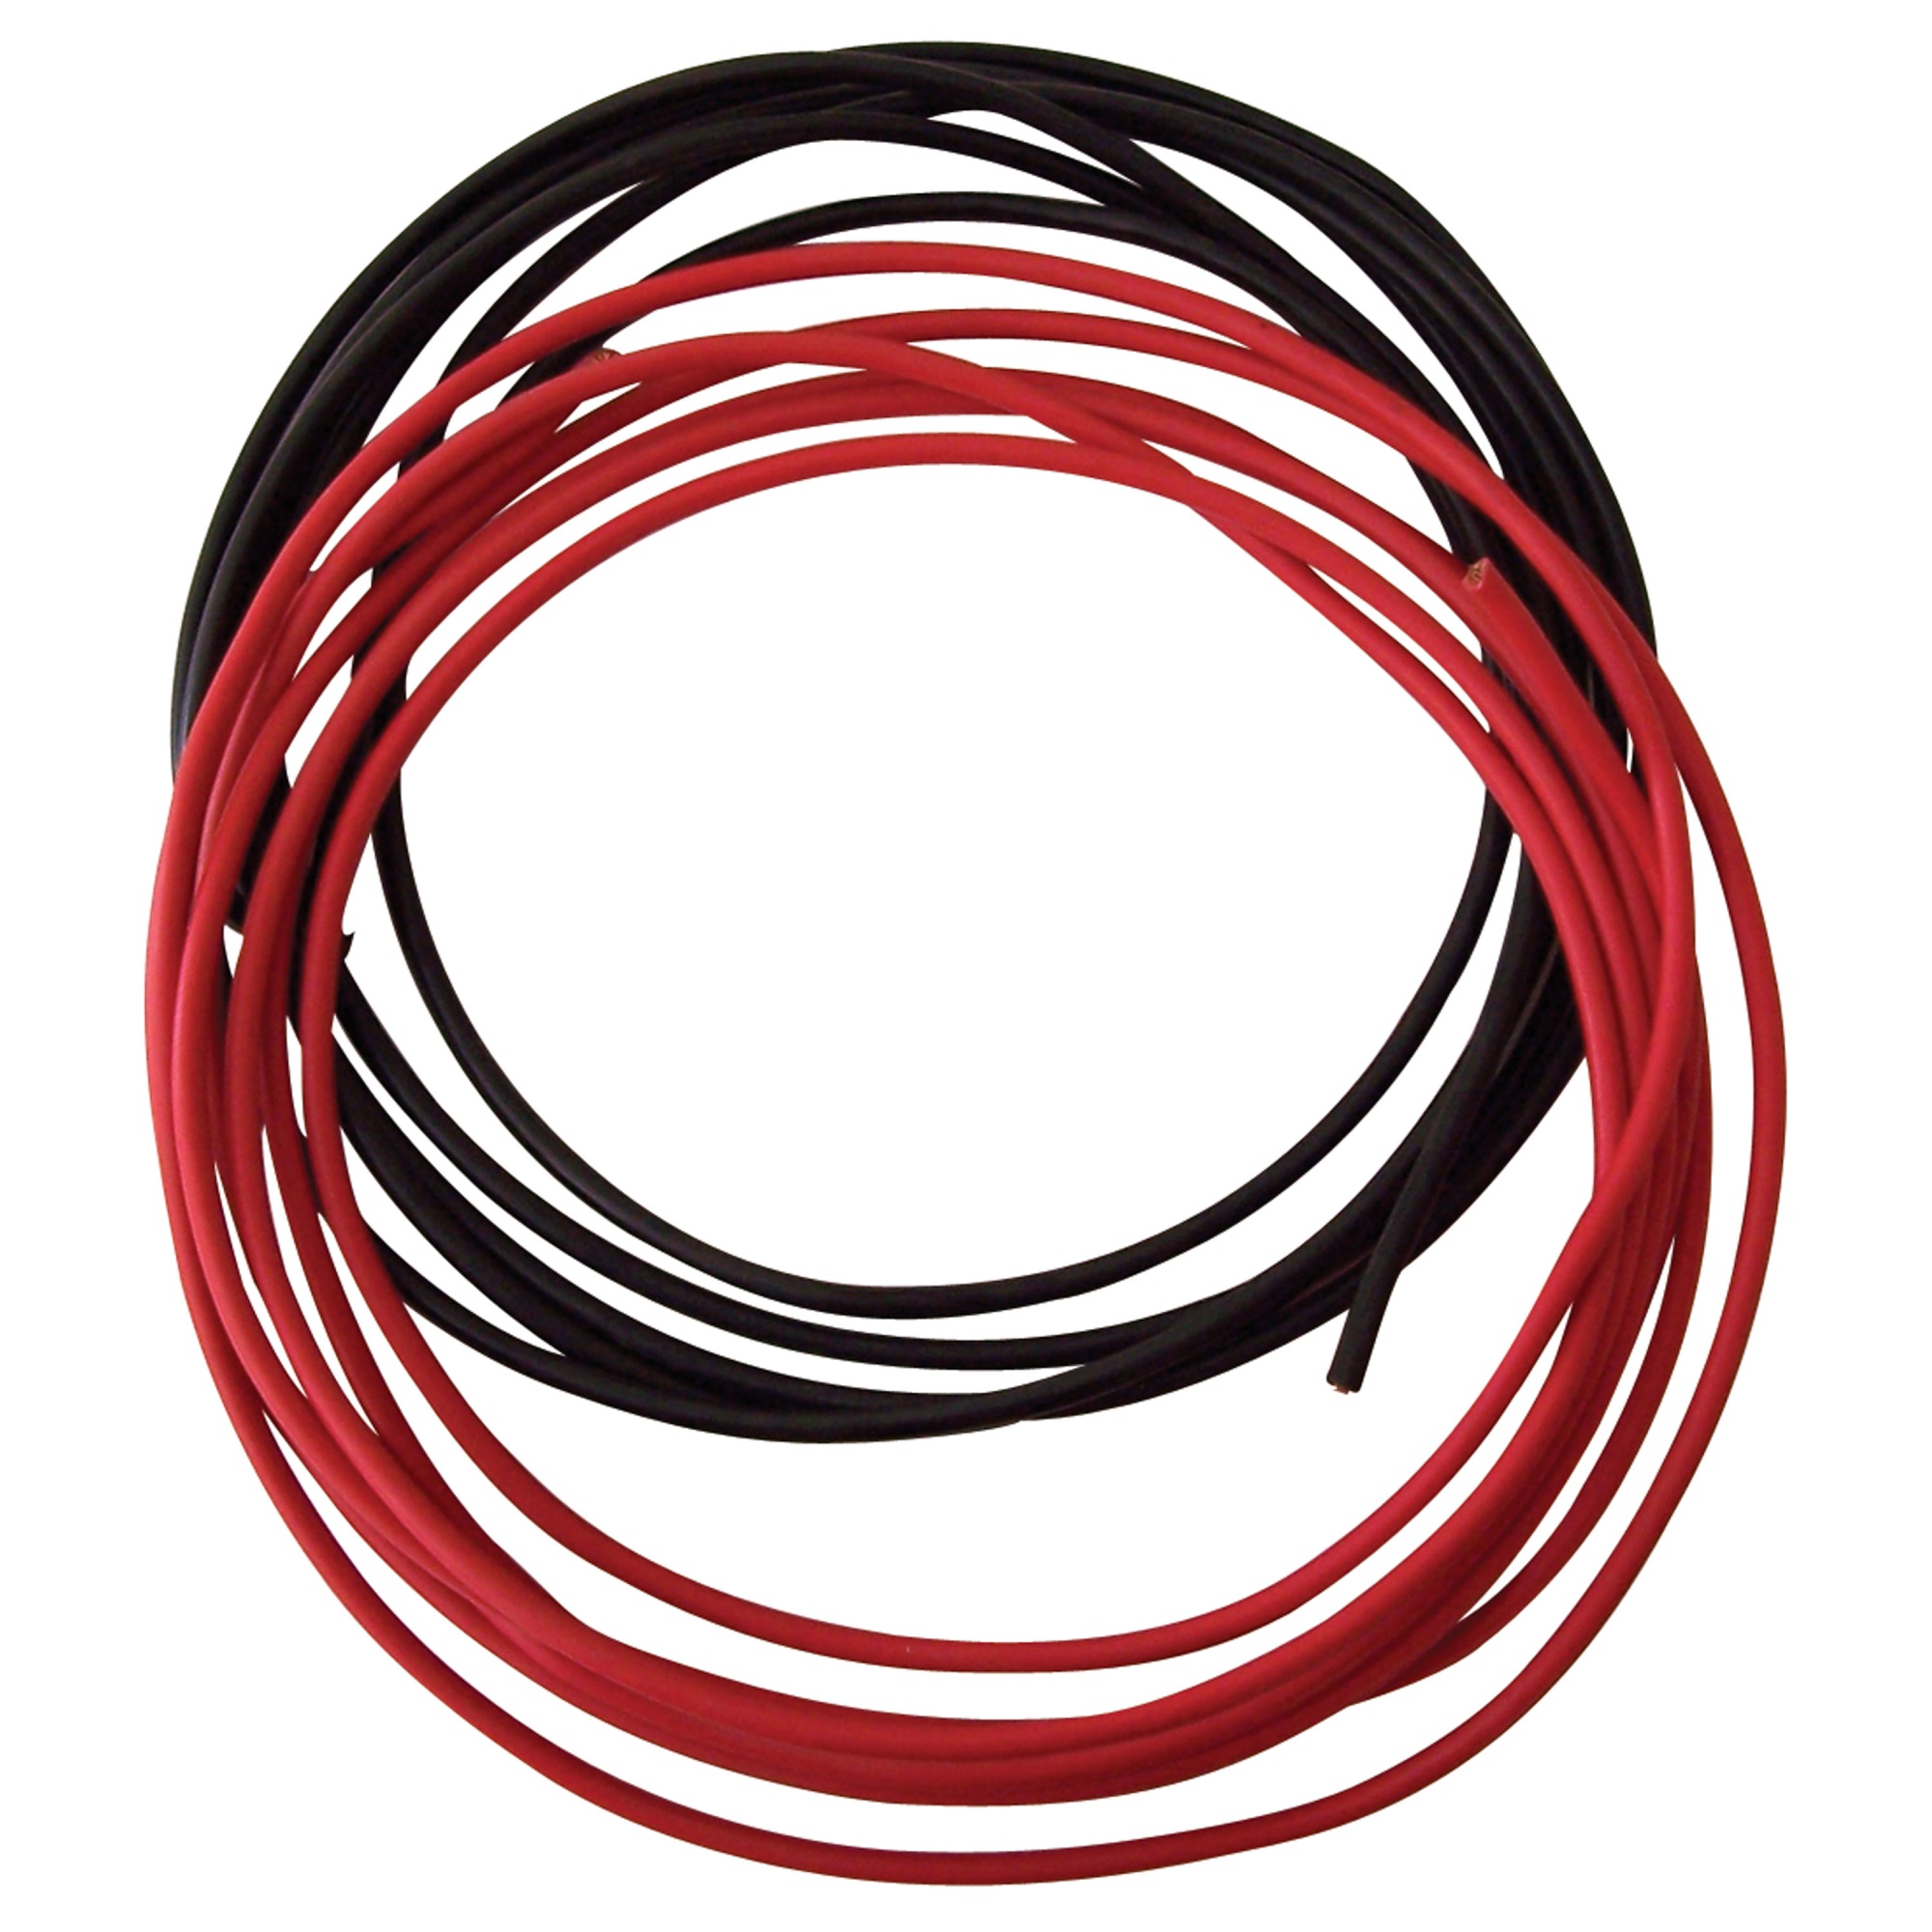 Rig Rite 550 Red and Black 8-Gauge Wire - 20'